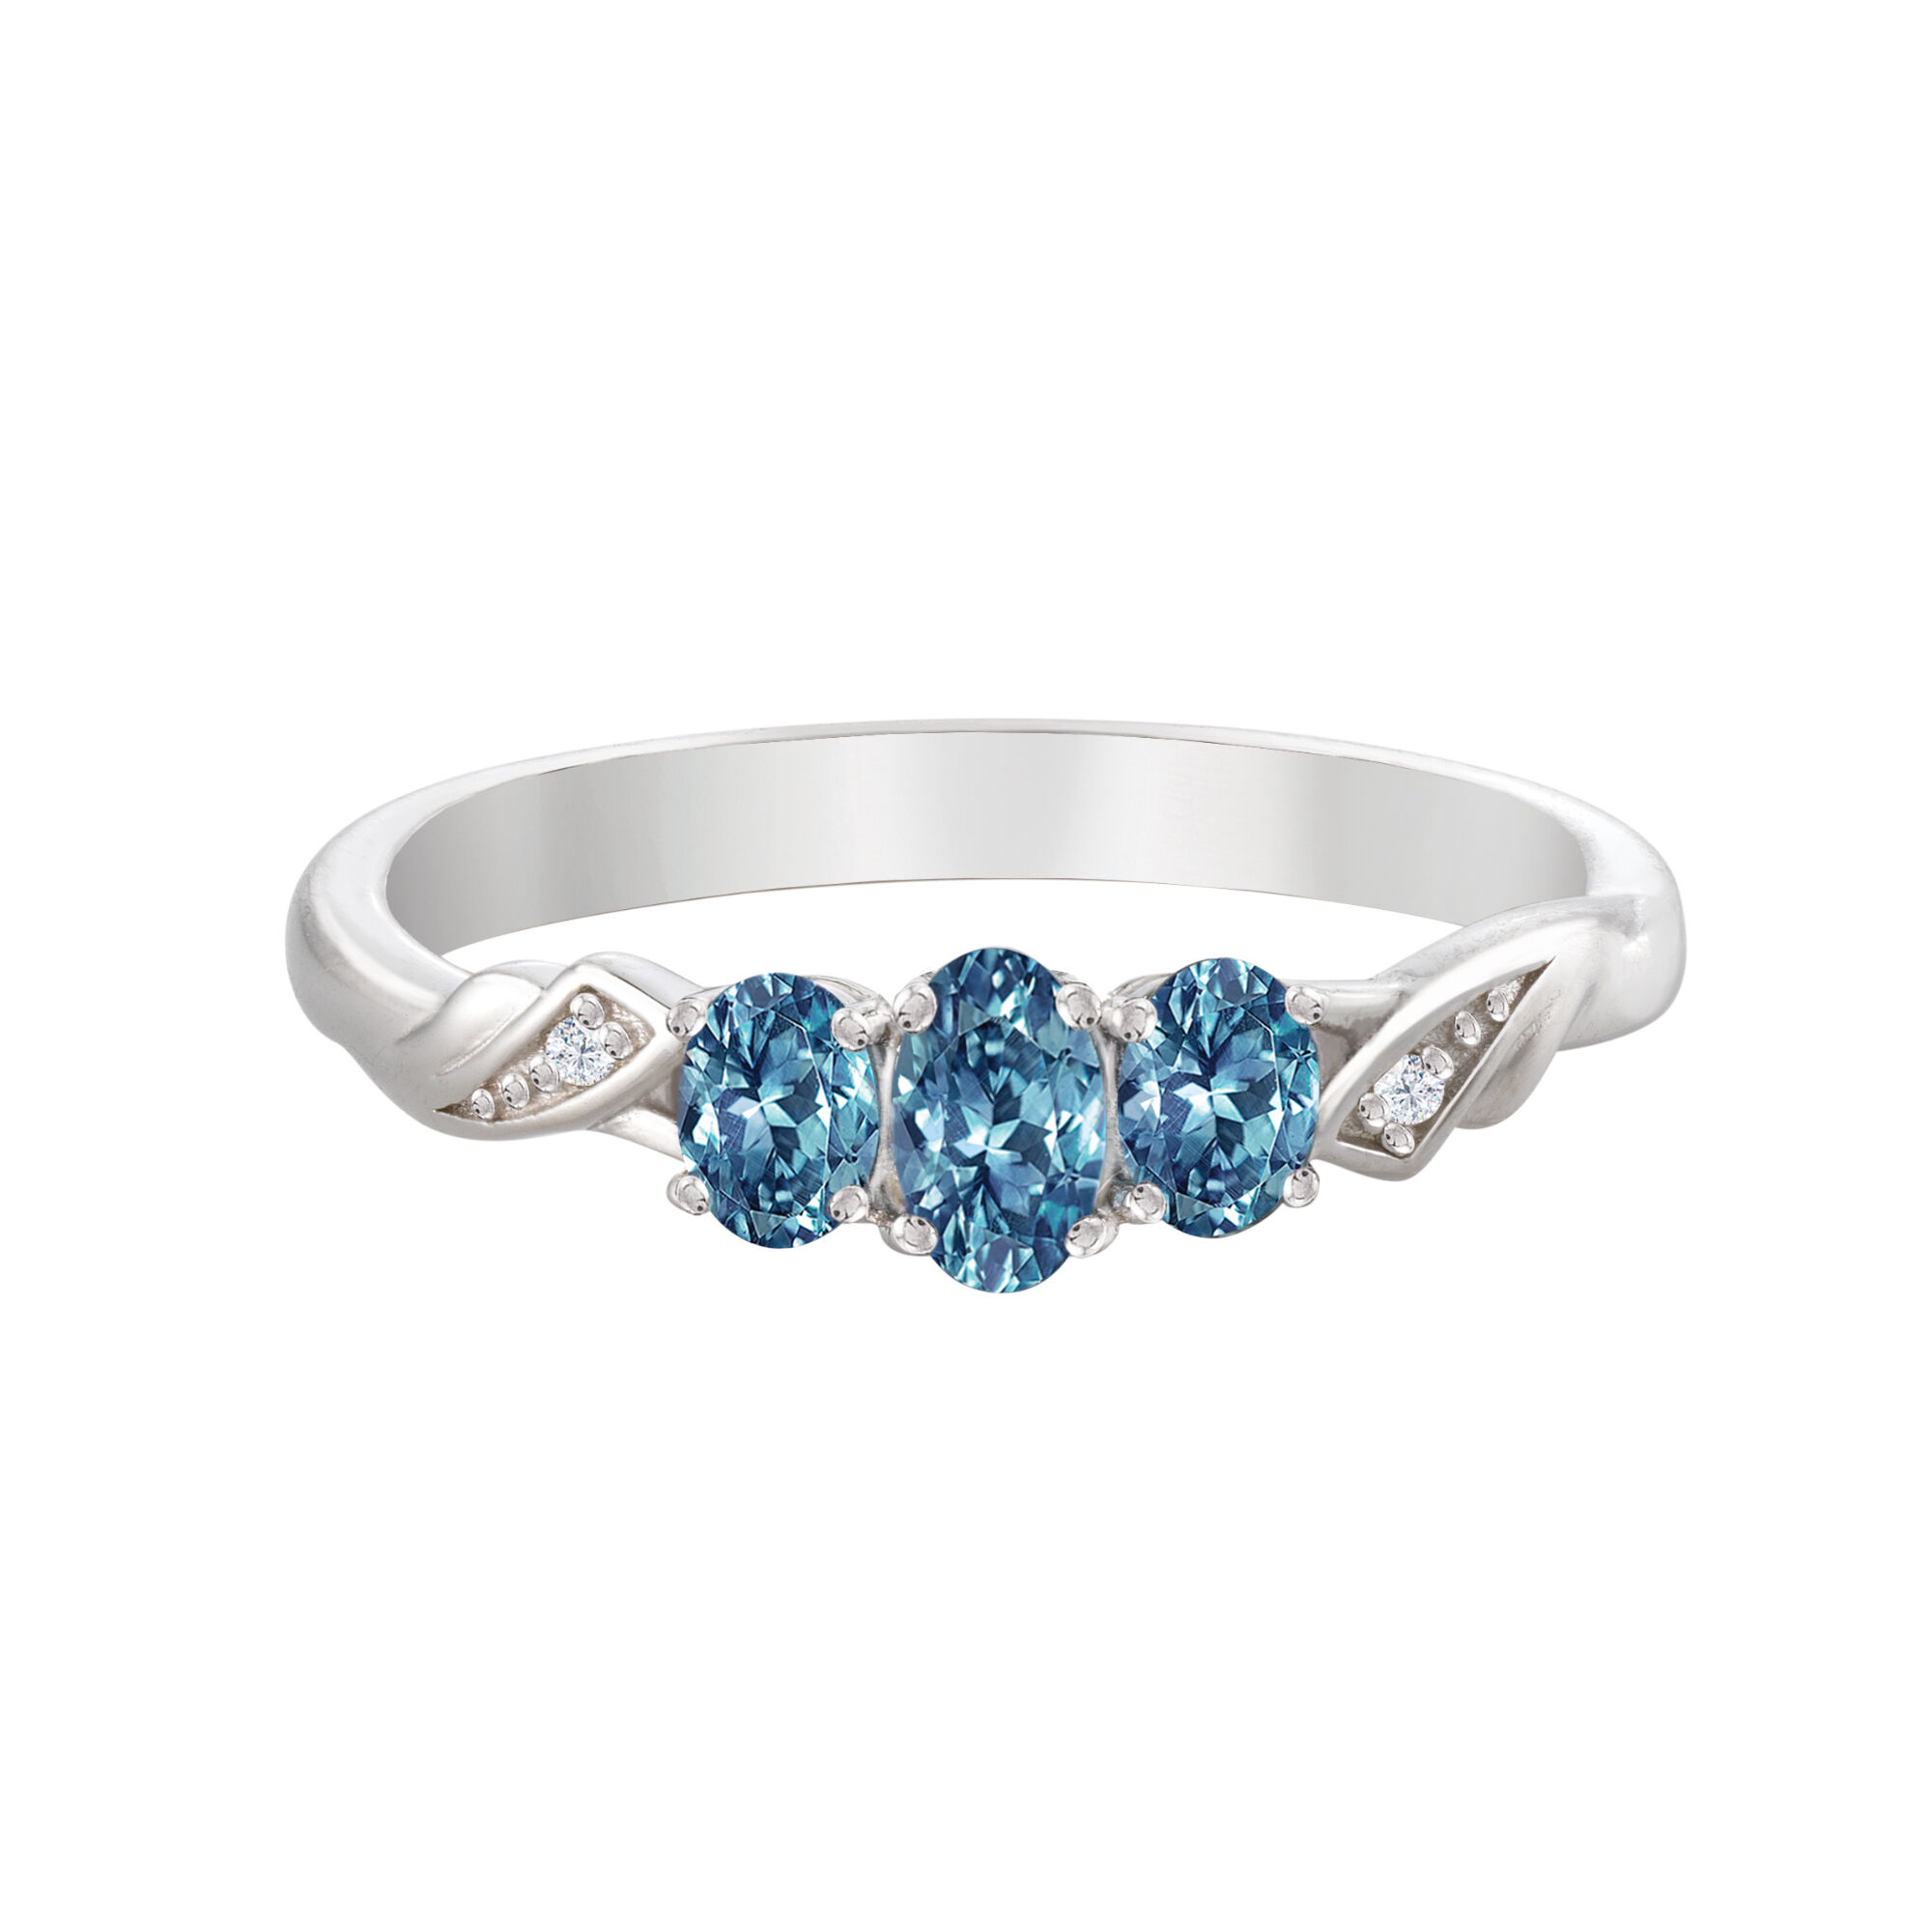 The American Sapphire Ring